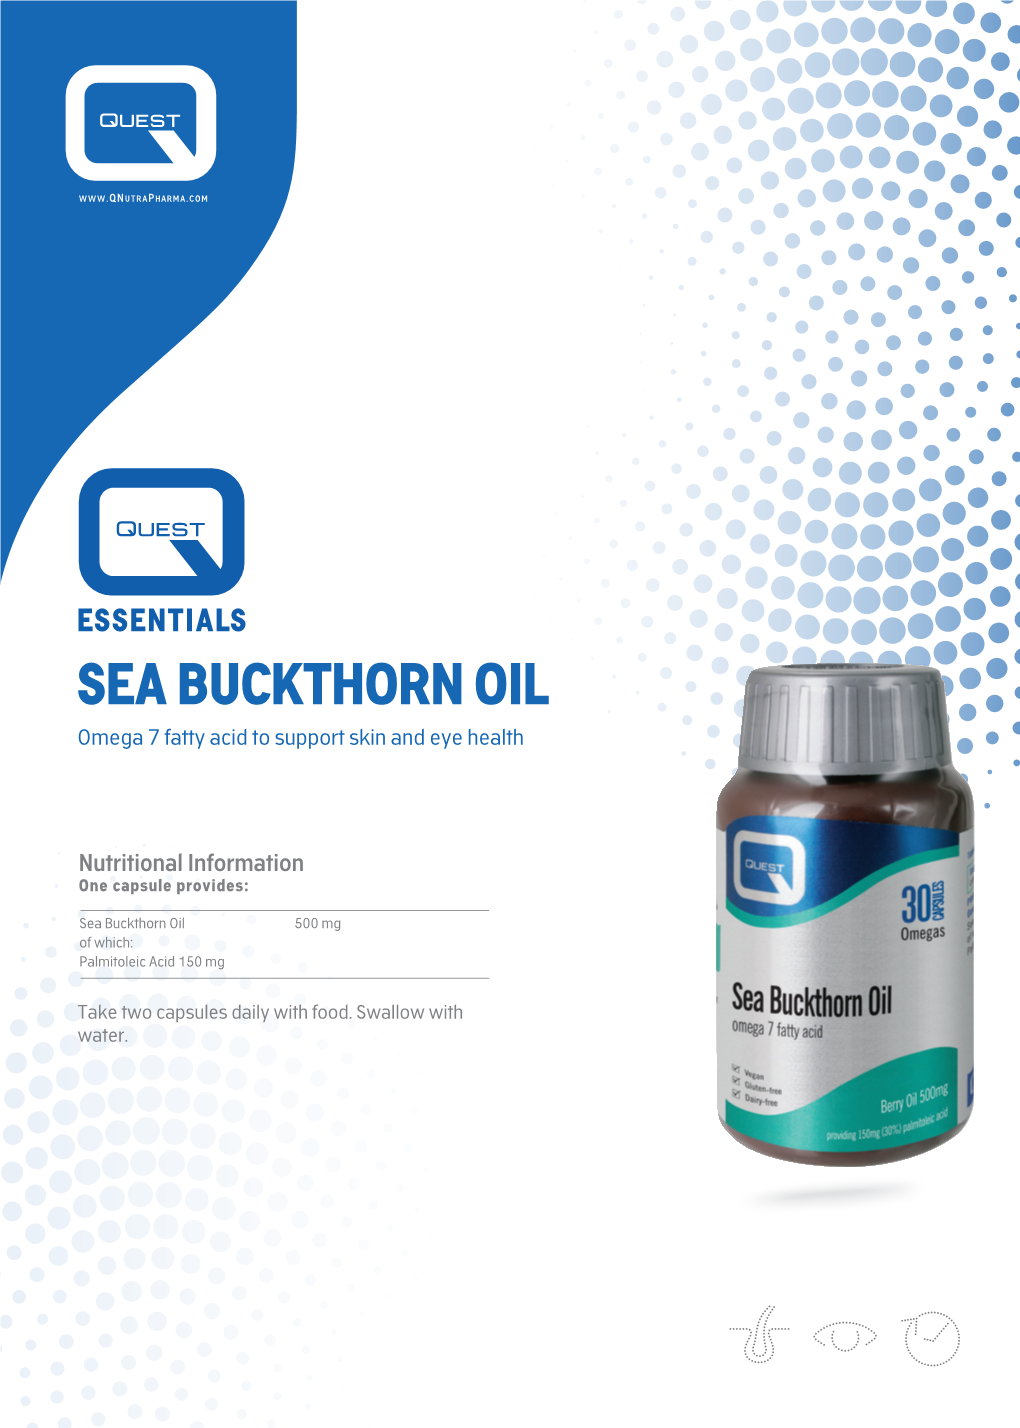 SEA BUCKTHORN OIL Omega 7 Fatty Acid to Support Skin and Eye Health